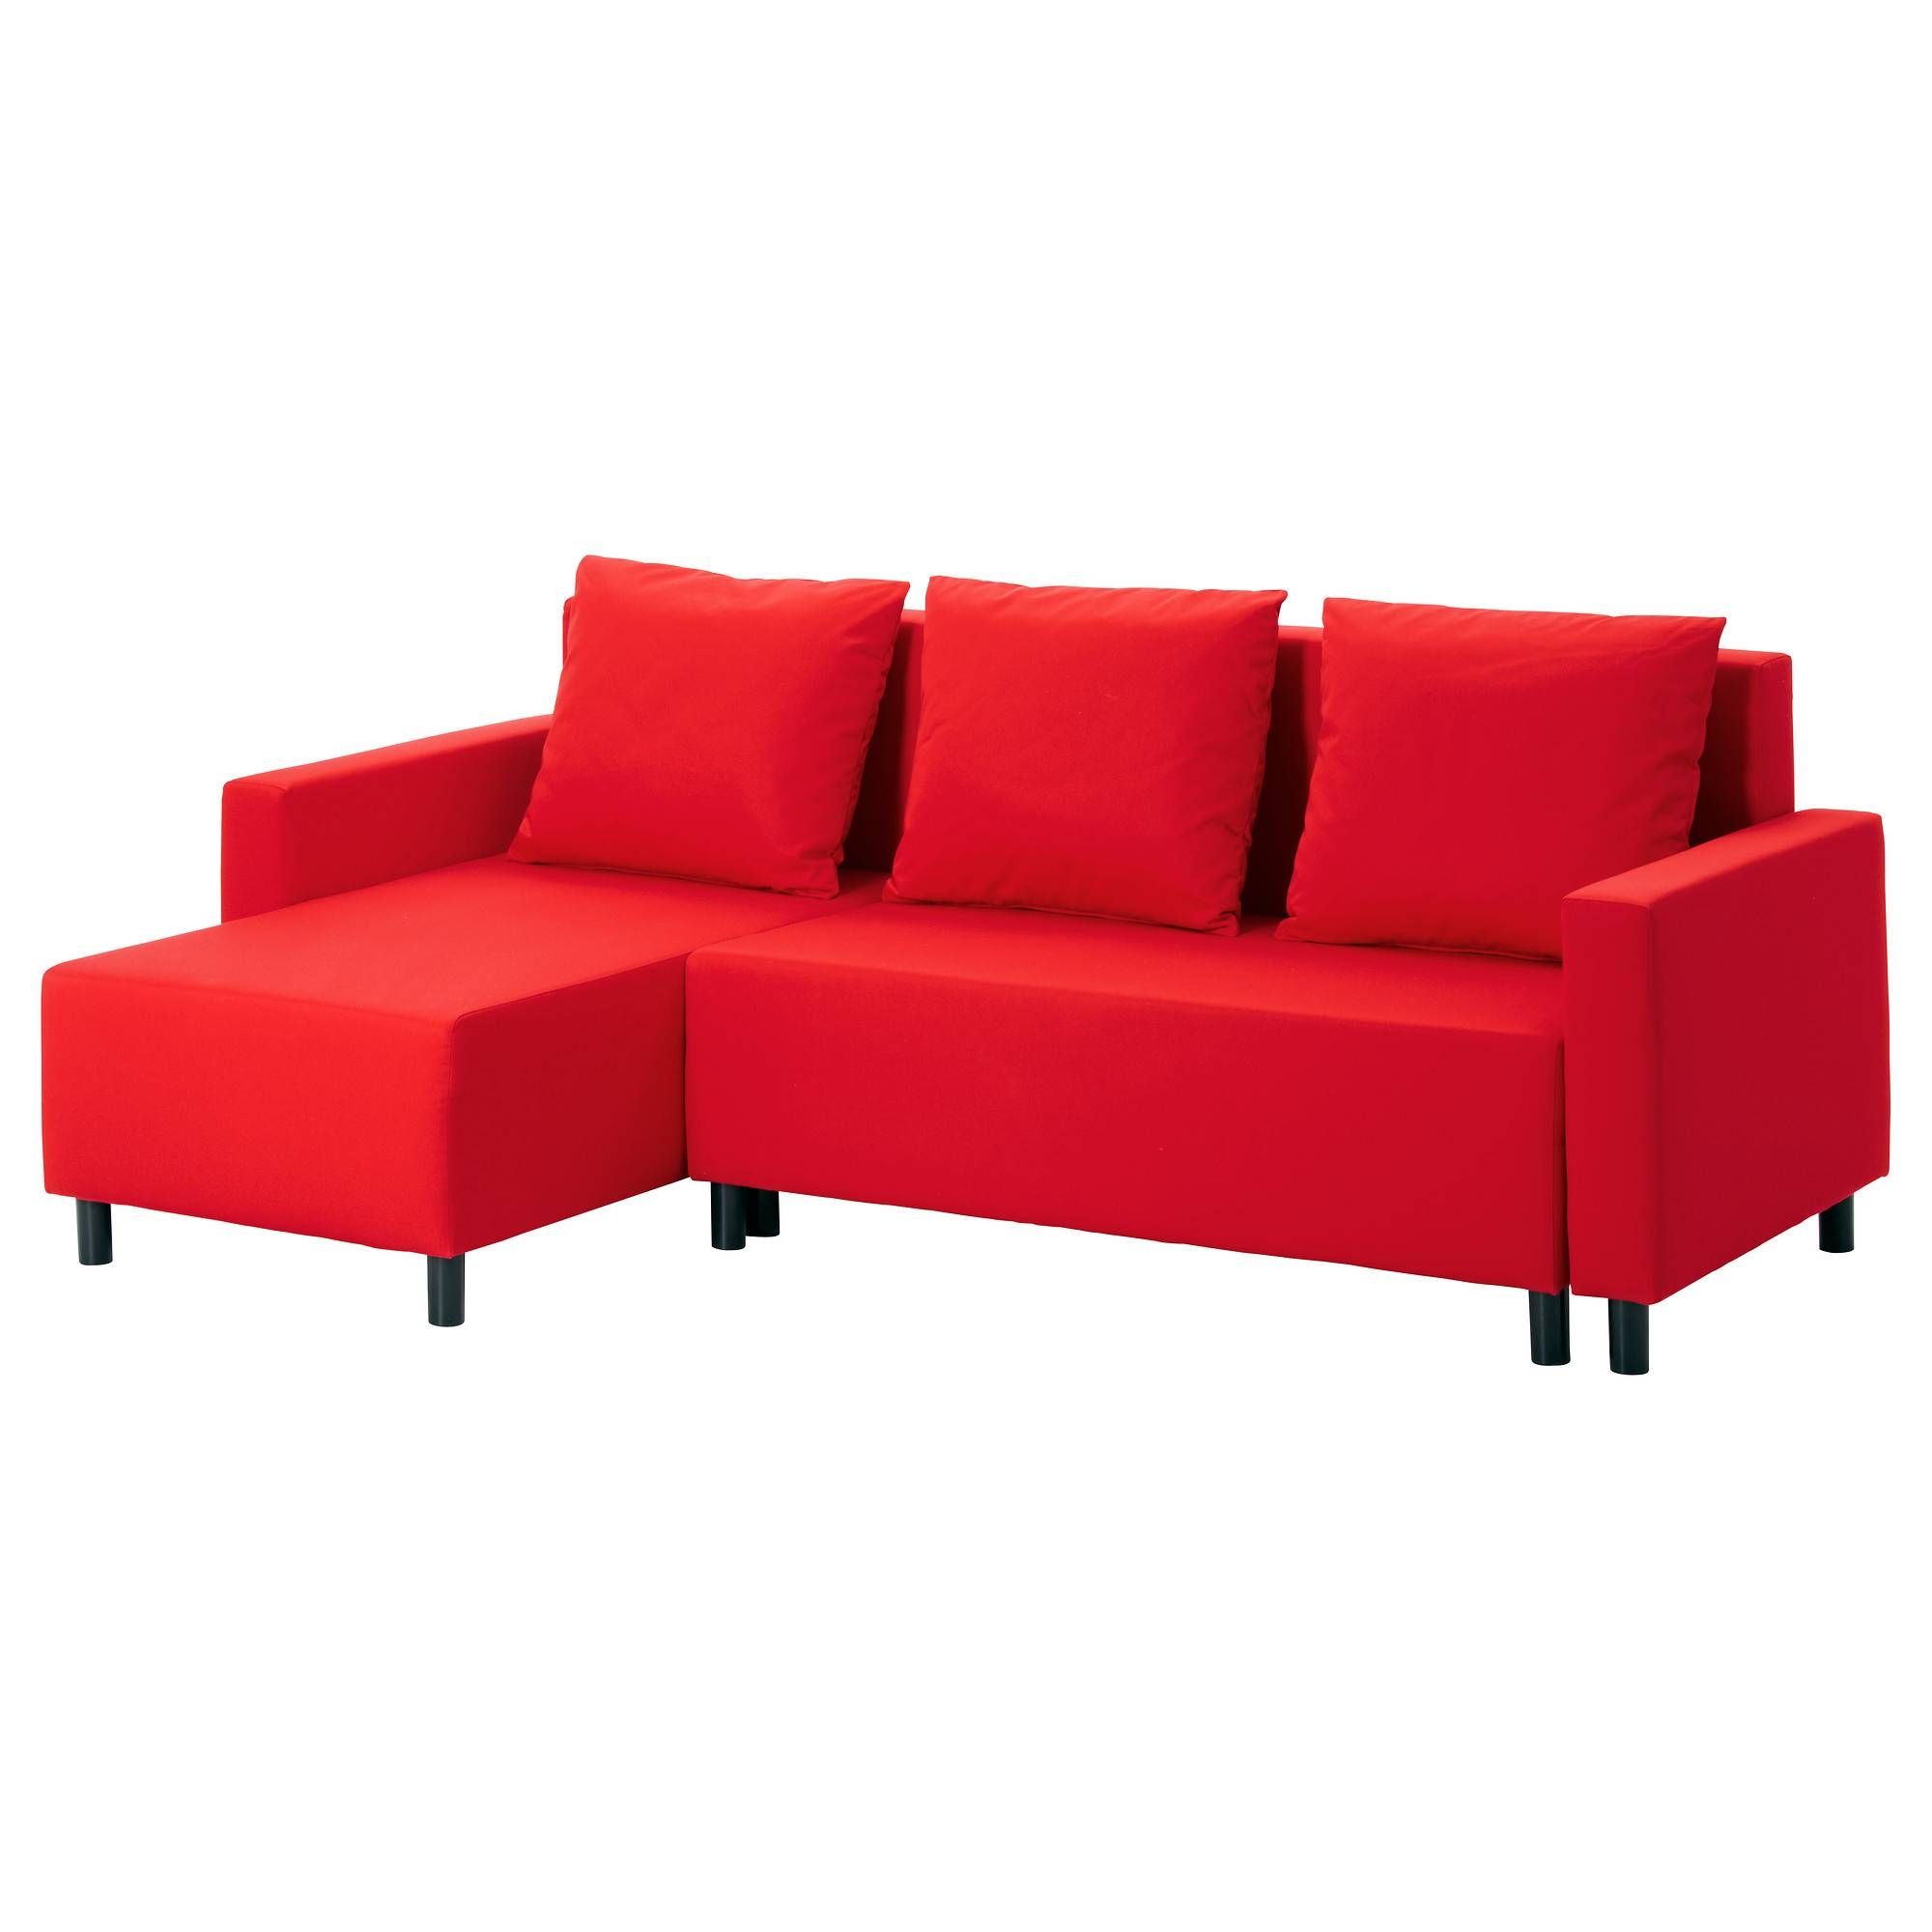 Lugnvik Sofa Bed With Chaise Longue Tallåsen Red – Ikea Within Red Sofa Beds Ikea (View 9 of 30)